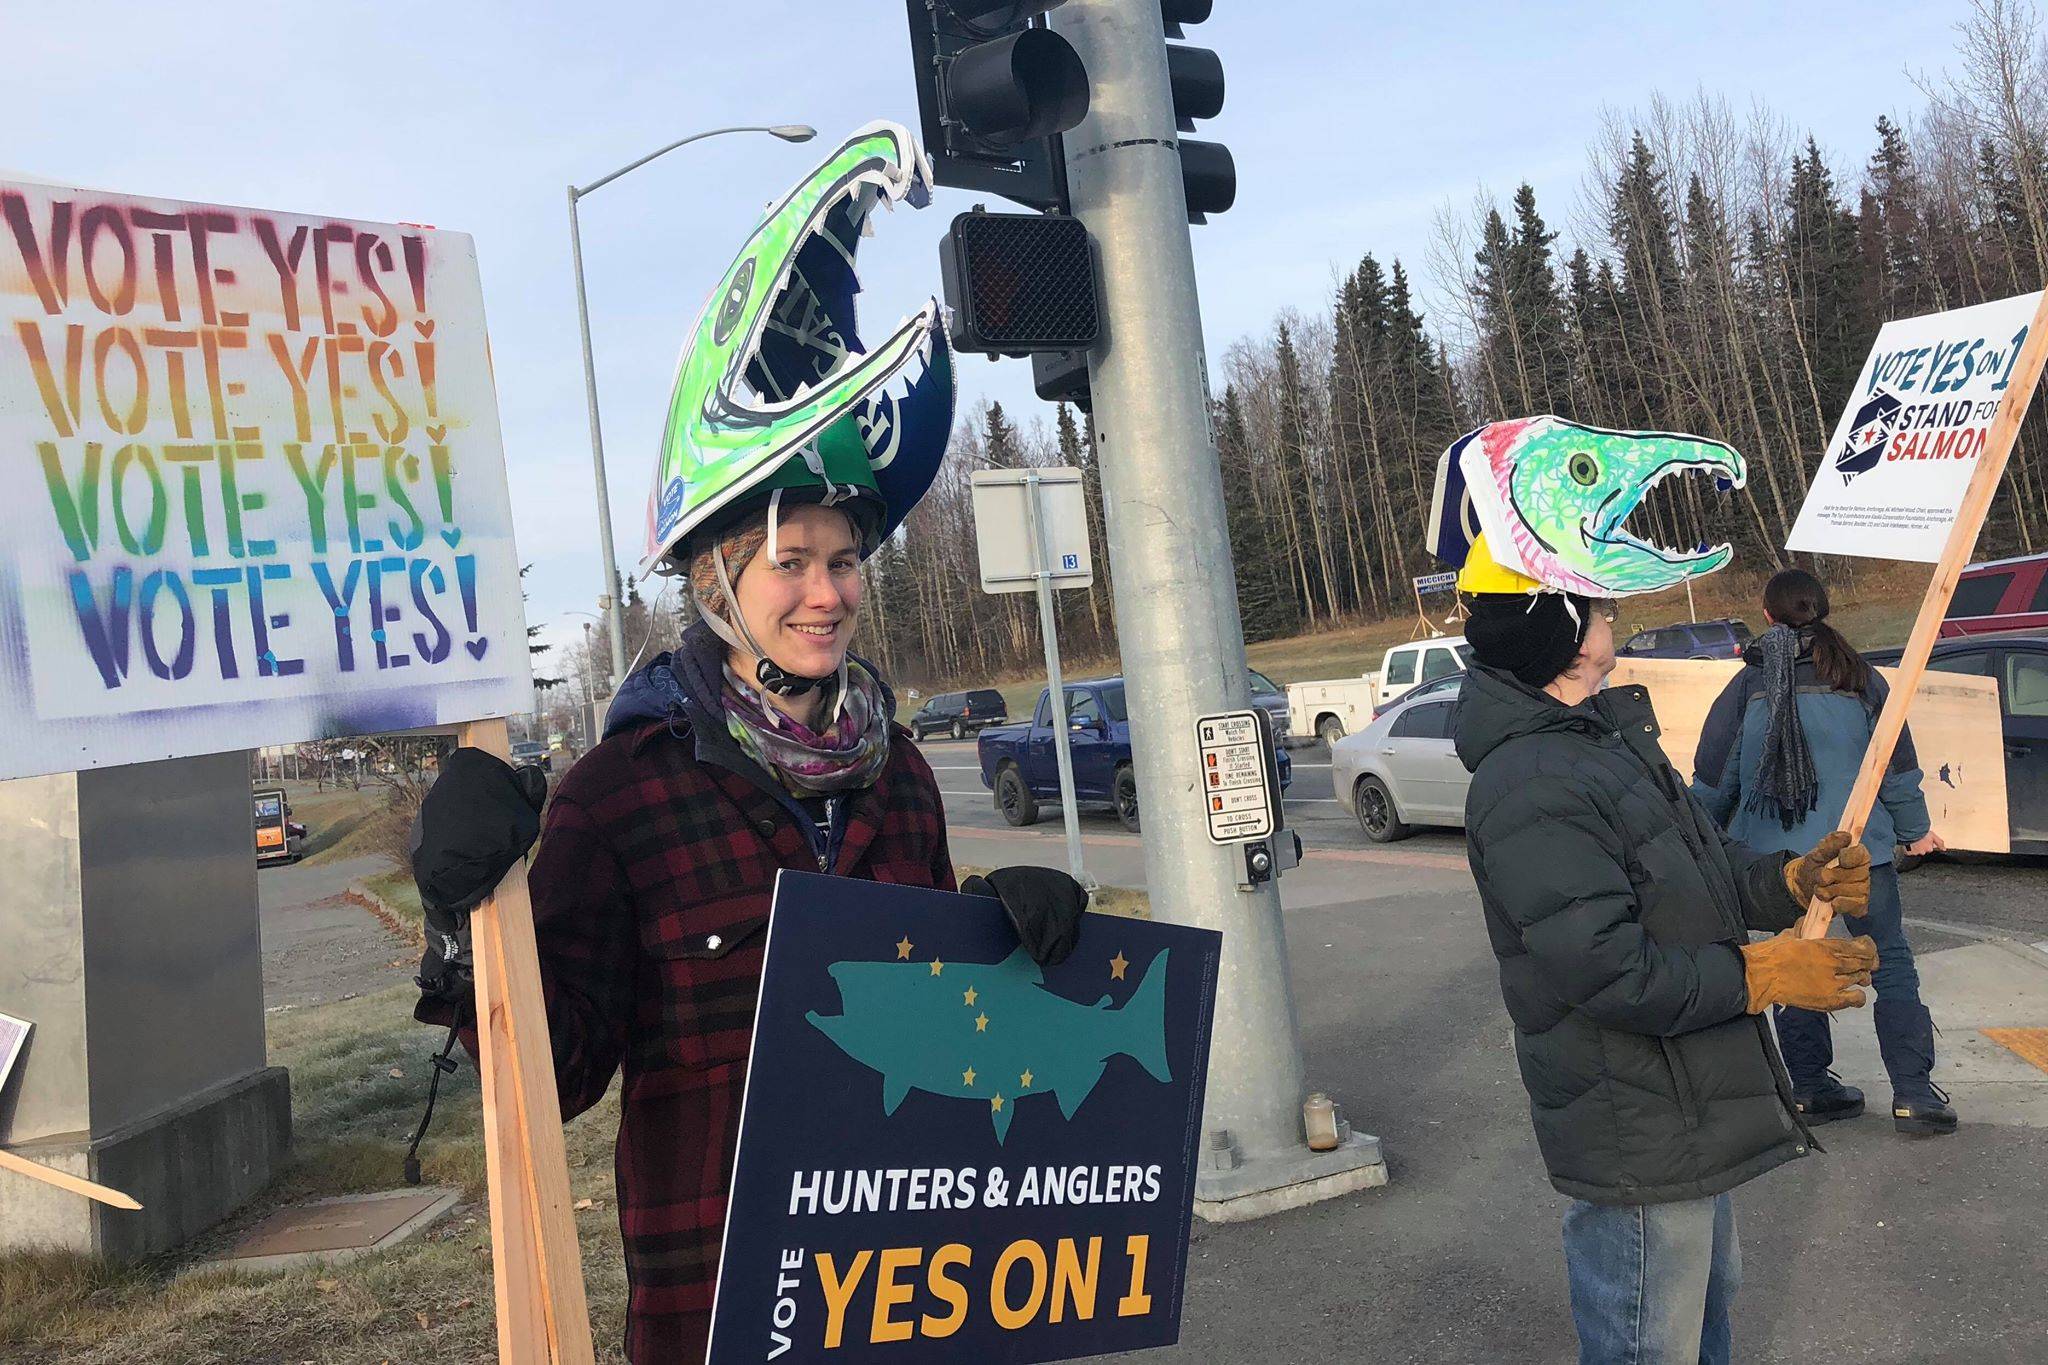 Supporters of the “Stand for Salmon” Ballot Measure 1 hold signs at the intersection of the Sterling and Kenai Spur Highways on Tuesday, Nov. 6, 2018, in Soldotna, Alaska. (Photo by Victoria Petersen/Peninsula Clarion)